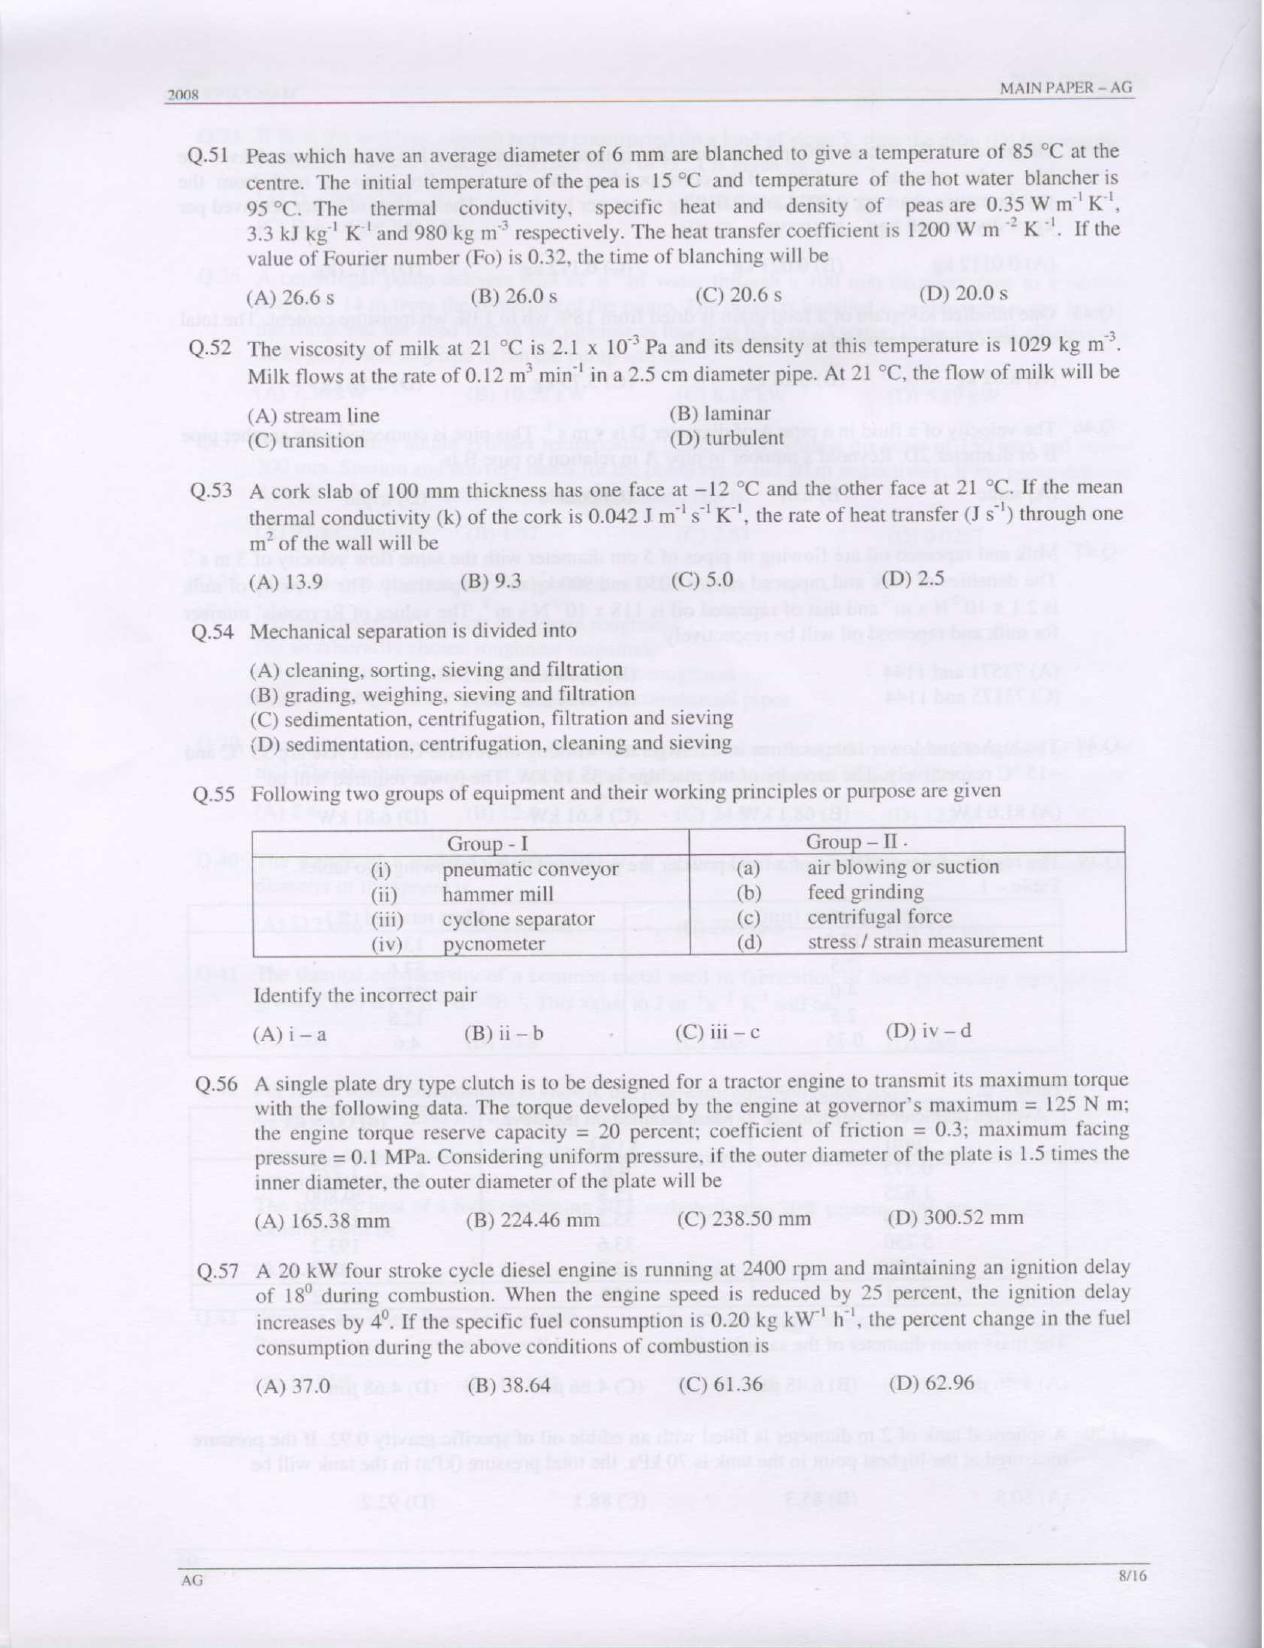 GATE 2008 Agricultural Engineering (AG) Question Paper with Answer Key - Page 8